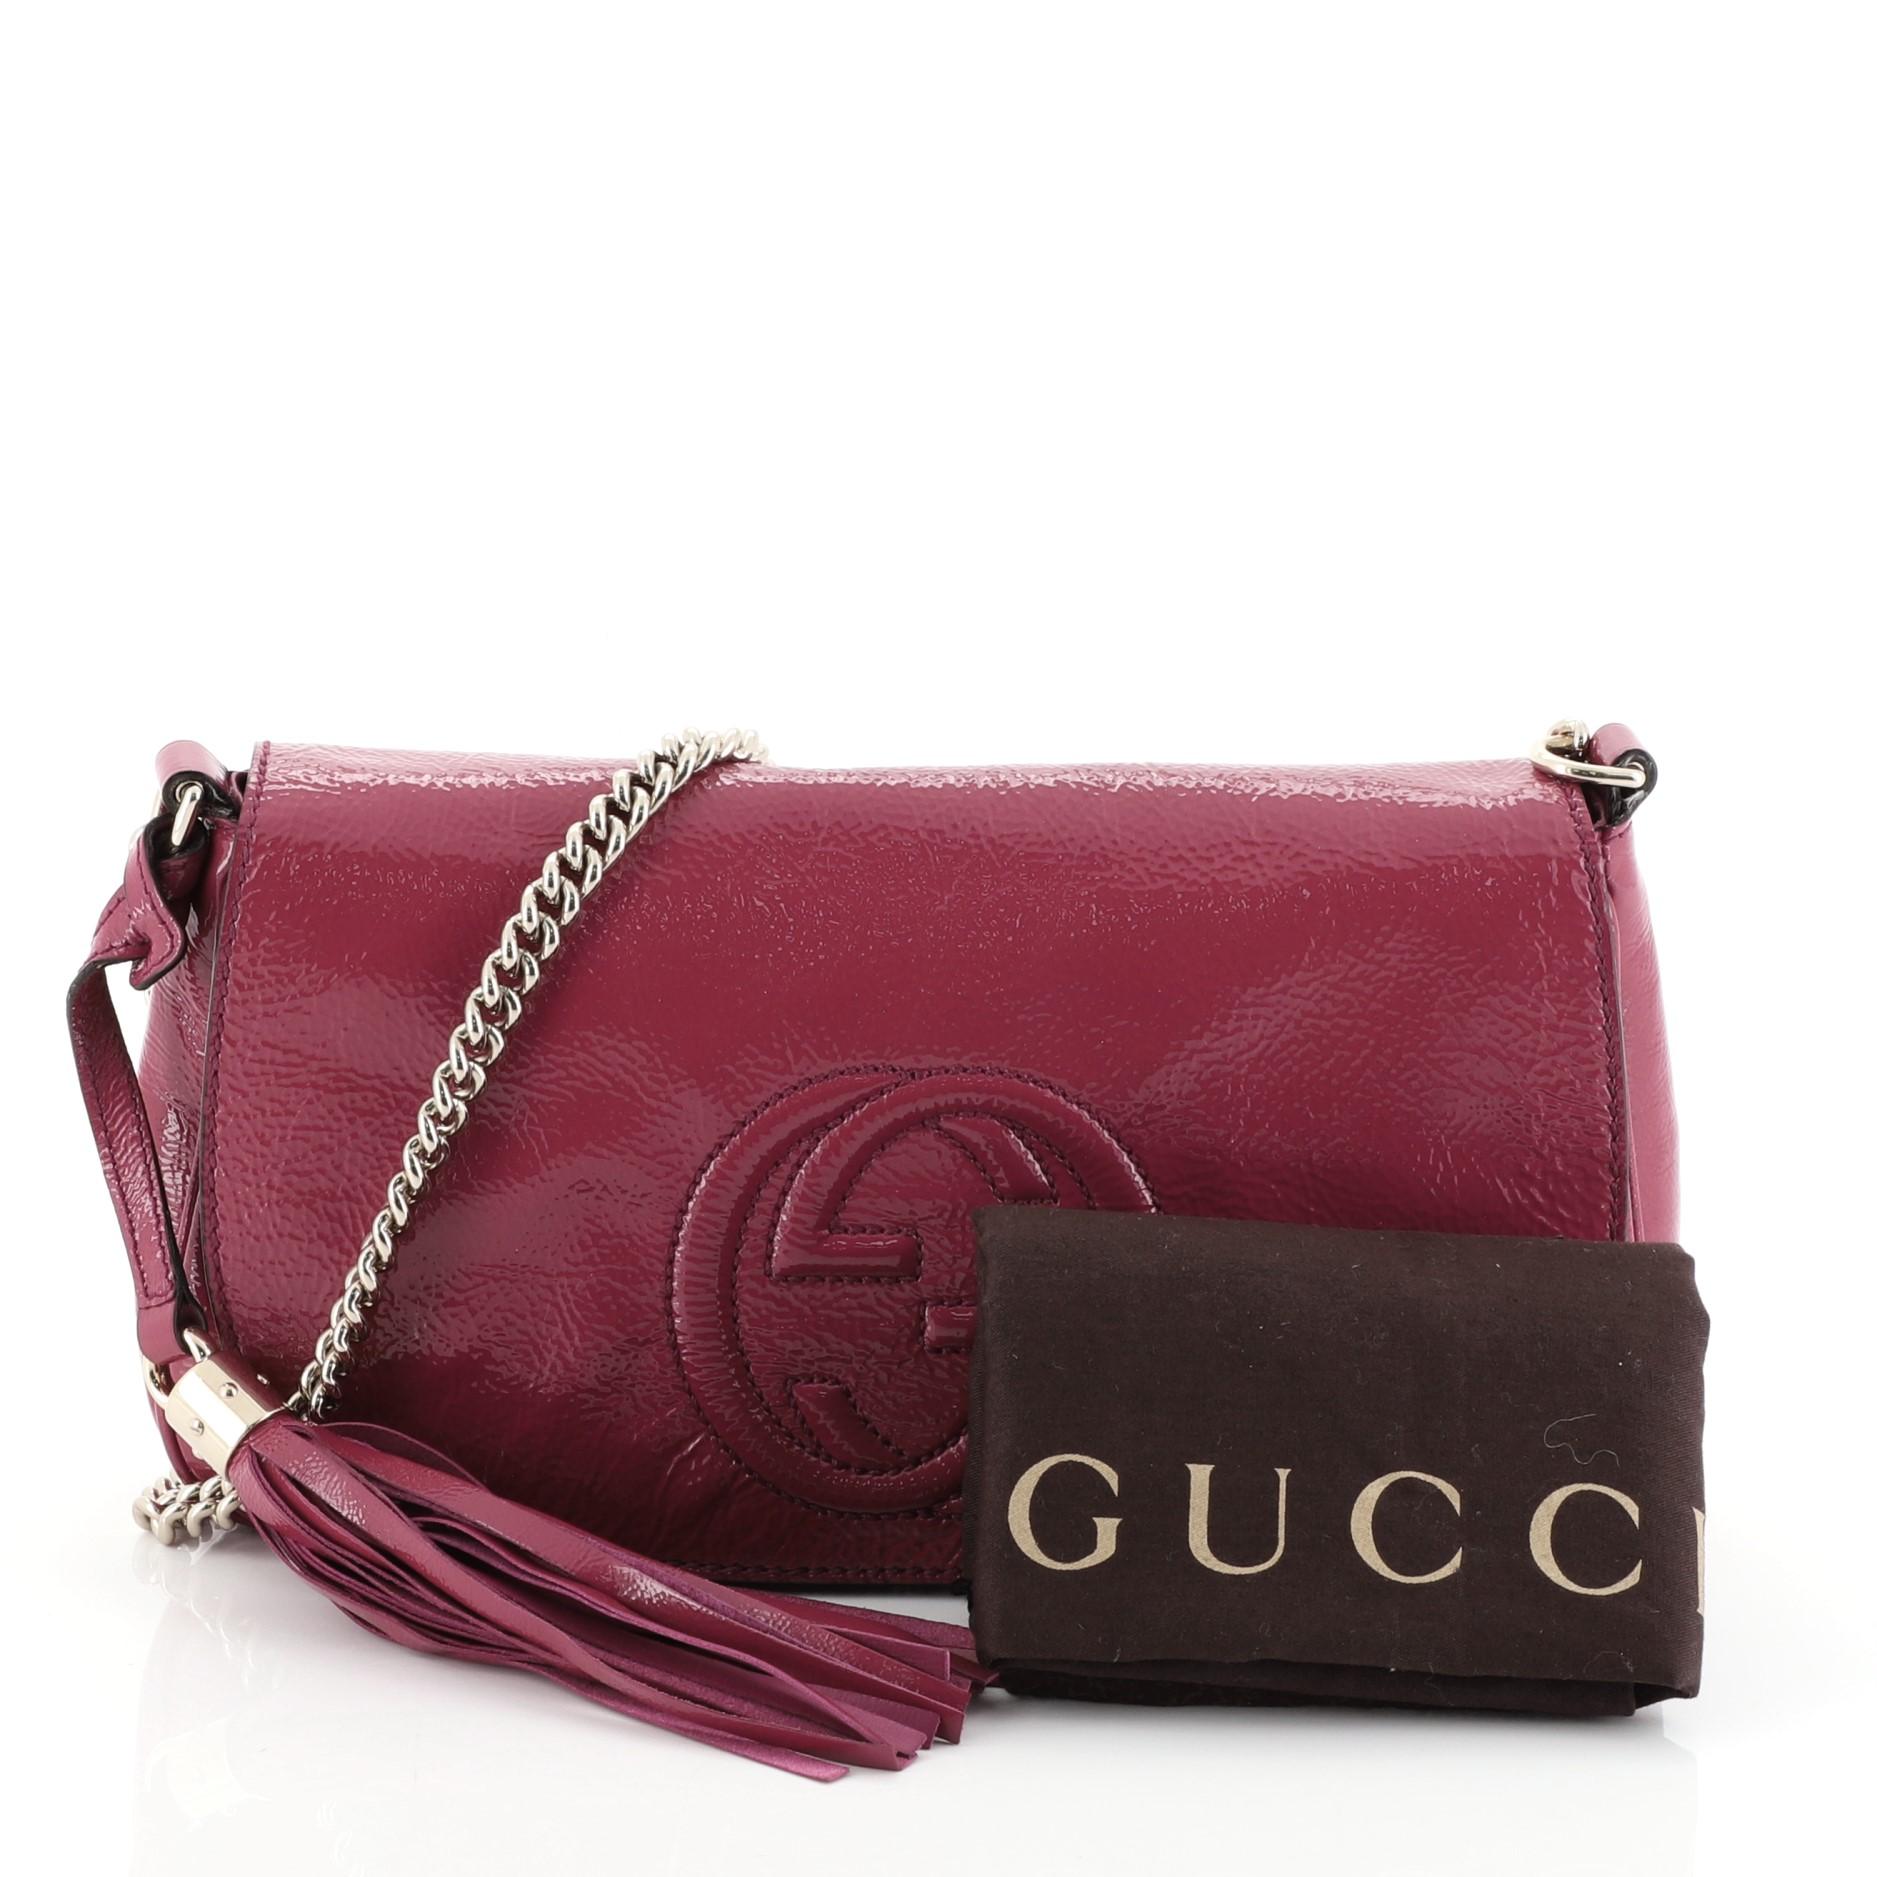 This Gucci Soho Chain Crossbody Bag Patent Medium, crafted from pink leather, features a long chain strap, stitched interlocking GG logo on its flap, and gold-tone hardware. Its hidden magnetic snap closure opens to a neutral fabric interior with